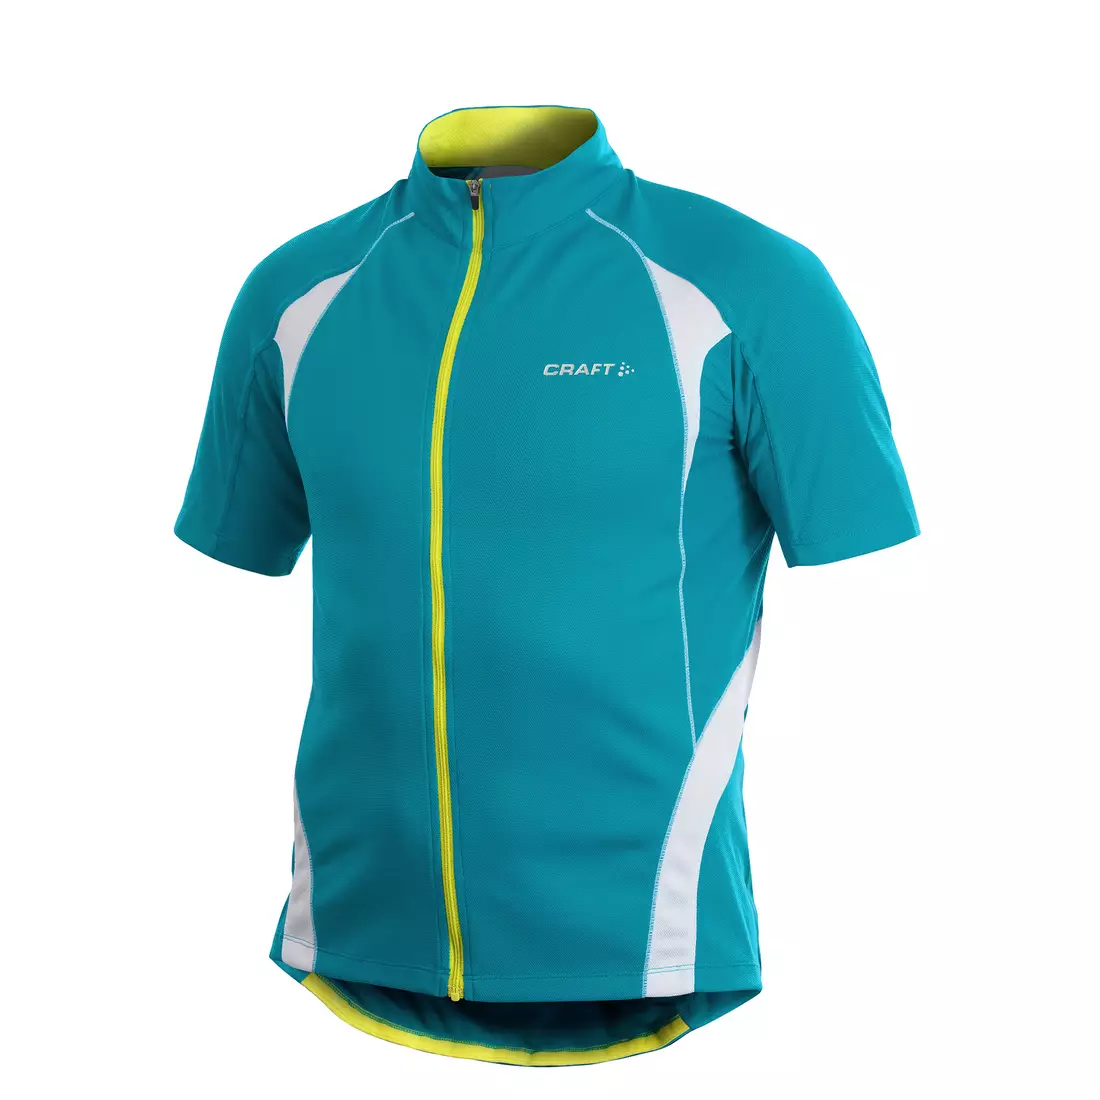 CRAFT ACTIVE BIKE - men's cycling jersey 1901287-2330